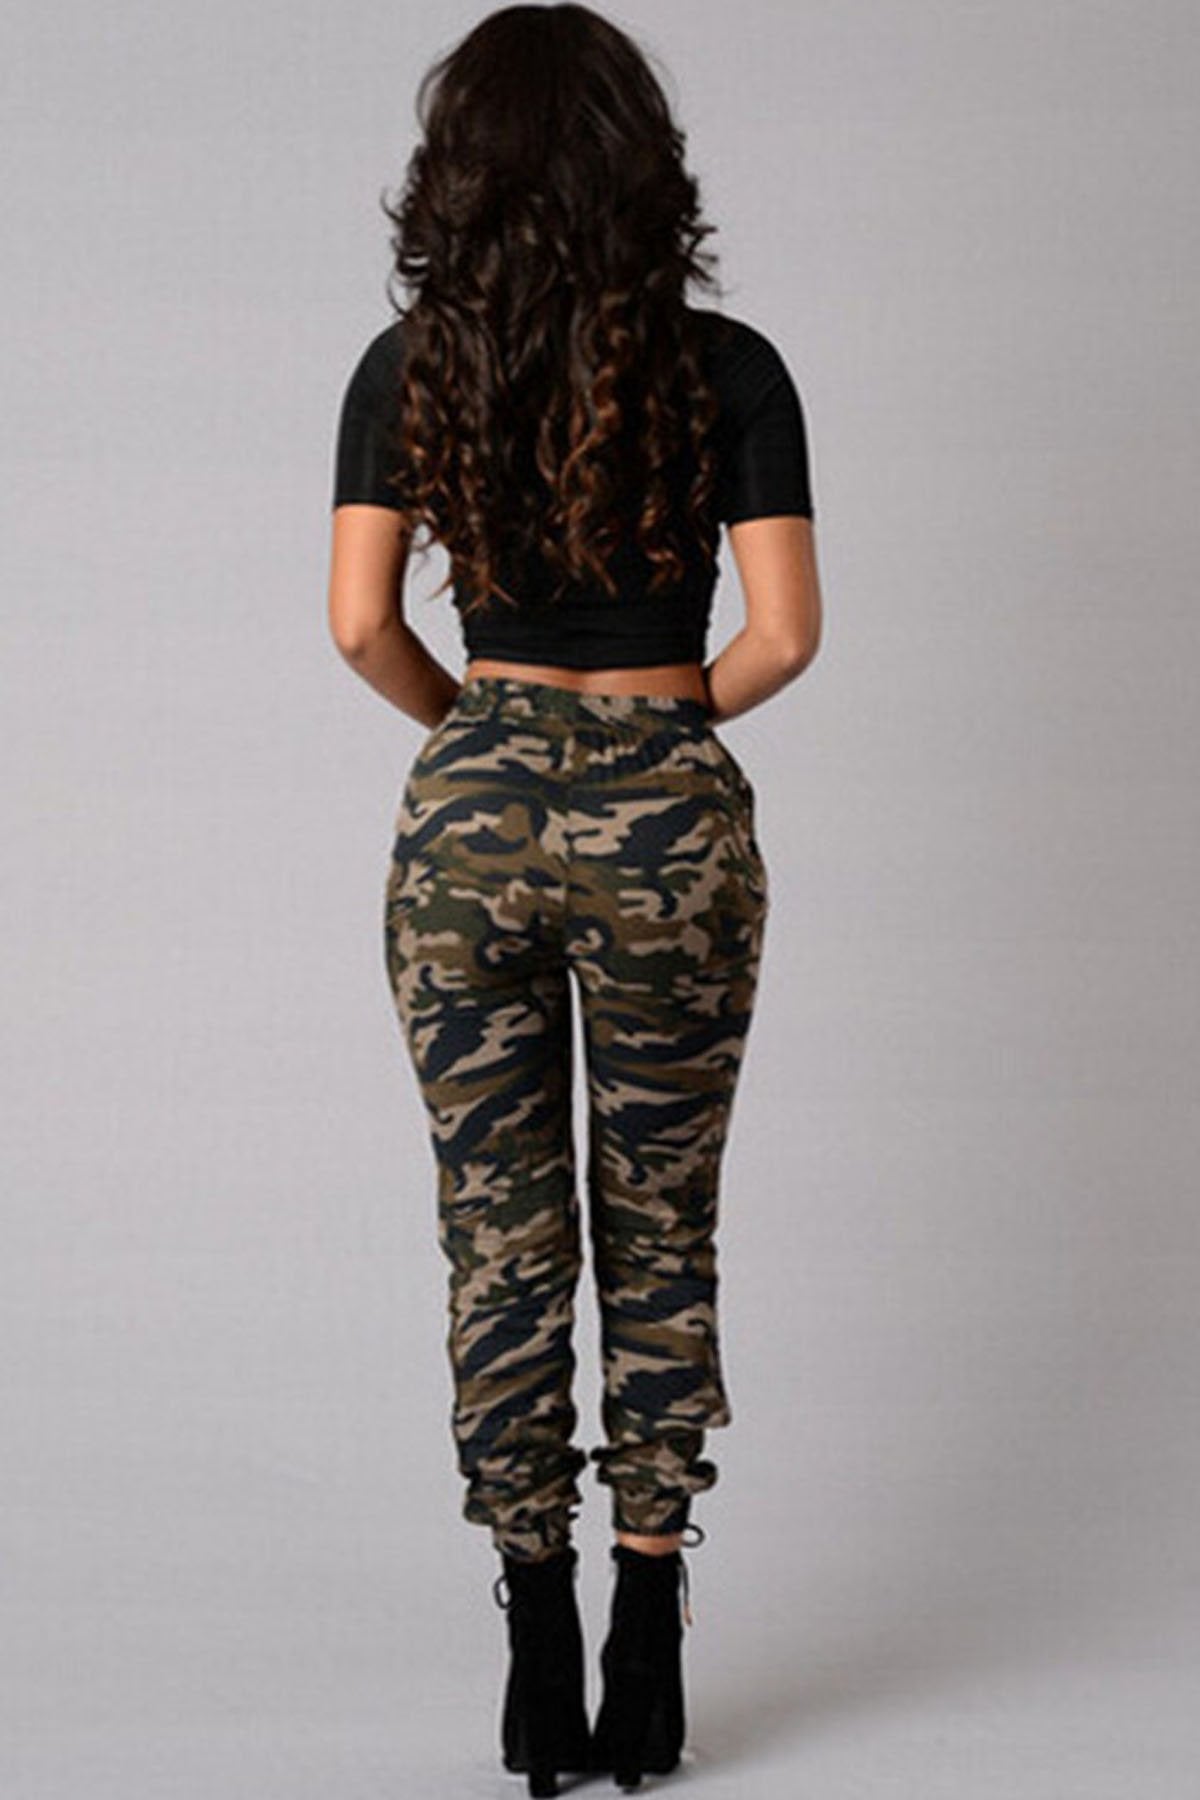 Personality Trend Camouflage Print Long Pants